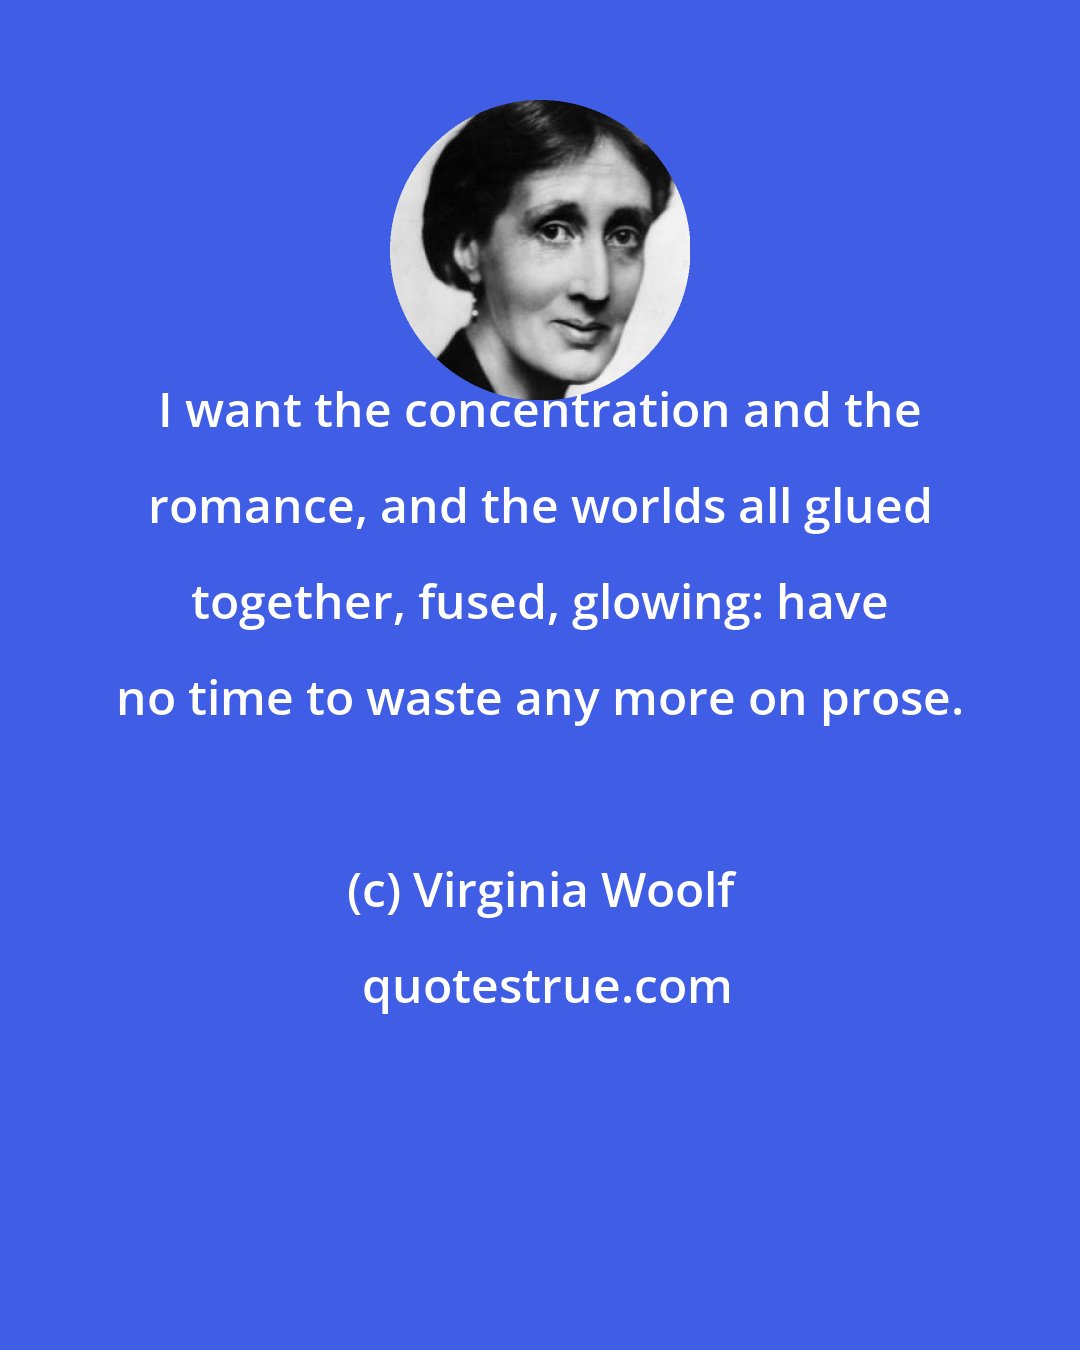 Virginia Woolf: I want the concentration and the romance, and the worlds all glued together, fused, glowing: have no time to waste any more on prose.